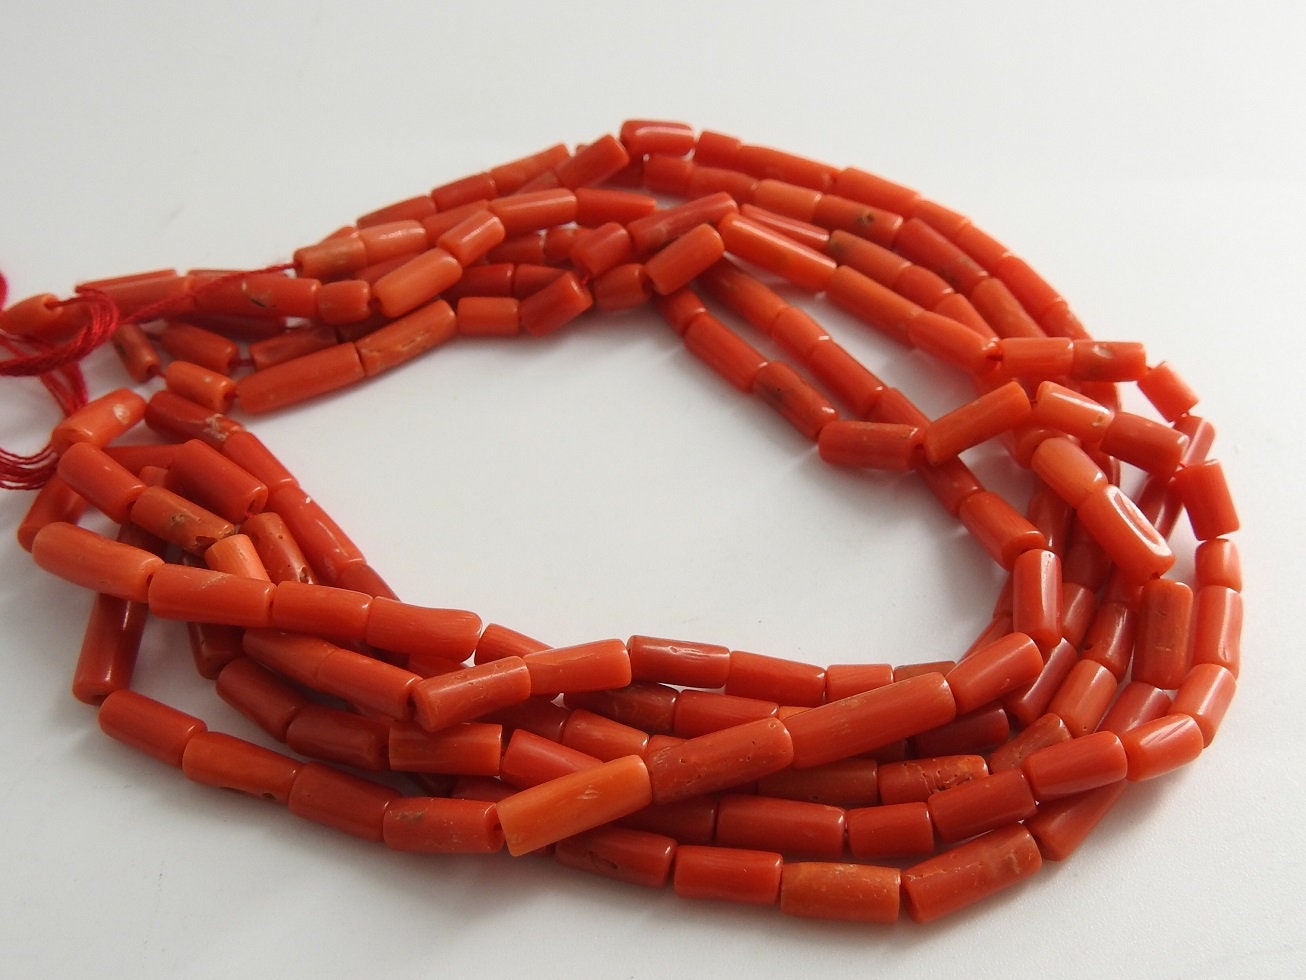 100%Natural Red Coral Smooth Tubes,Drum,Cylinder,Handmade,Bead,Loose Stone,For Making Jewelry Wholesaler Supplies BK(CR2) | Save 33% - Rajasthan Living 15